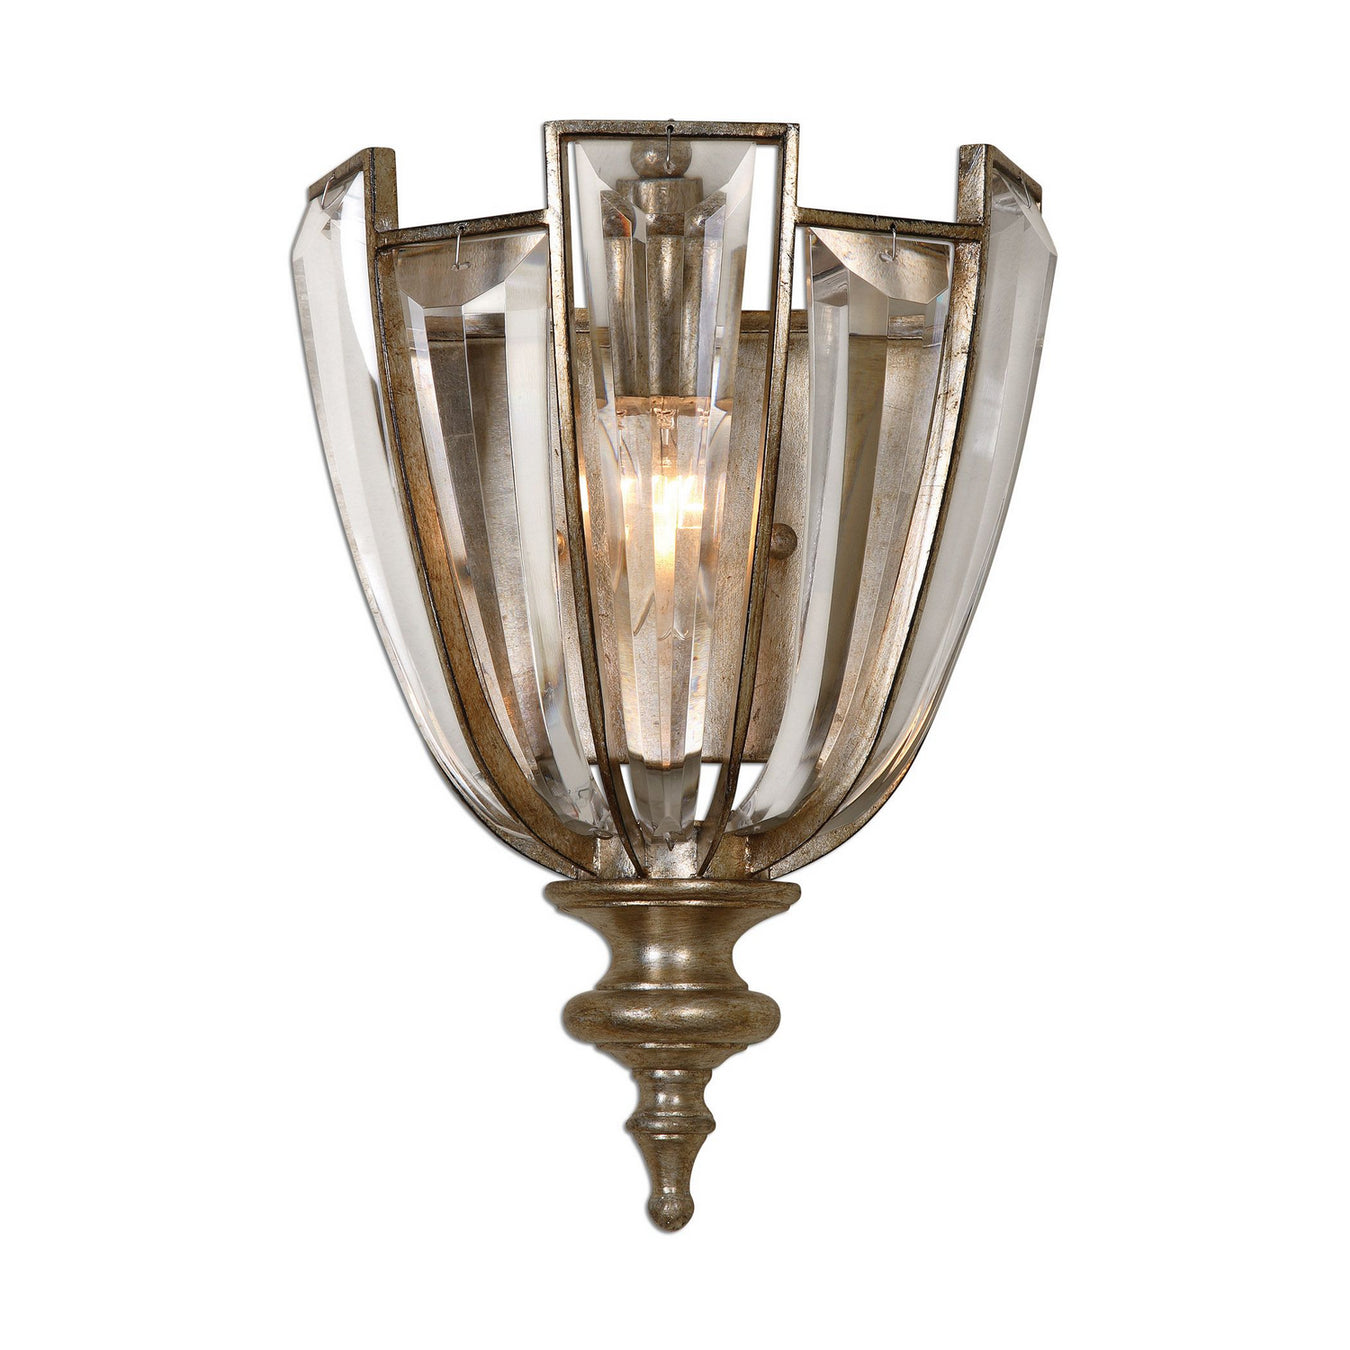 Uttermost's Vicentina 1 Light Crystal Wall Sconce